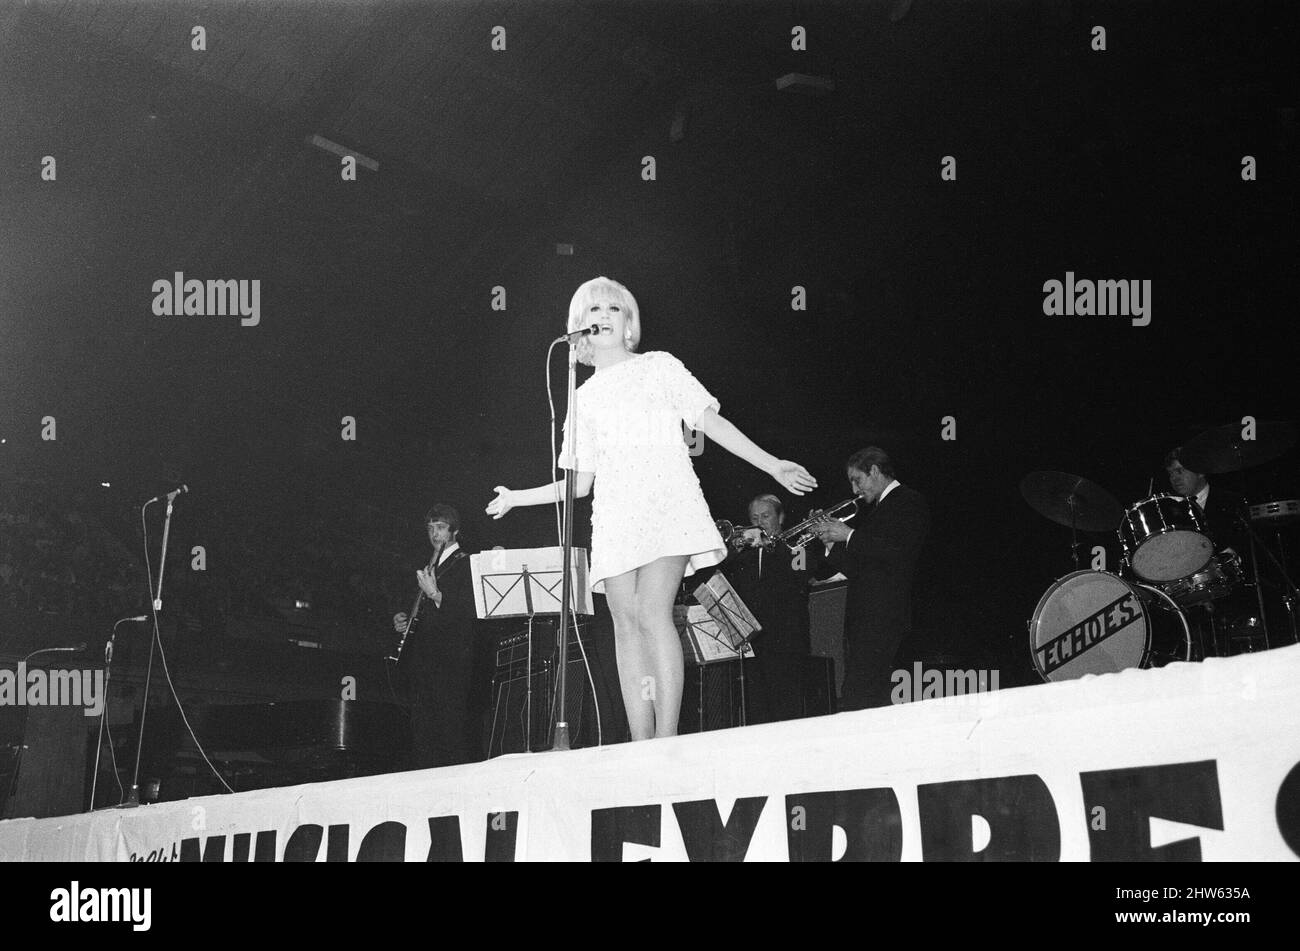 Dusty Springfield sings at The New Musical Express Poll Winners All Star Concert at The Empire Pool Wembley. Taking place in Wembley Pool in London and compered by Jimmy Savile and DJ Simon Dee it saw 10,000 fans attending the Poll Winners show. It lasted for three and a half hours and featured star turns from the likes of The Beach Boys, The Small Faces, Dusty Springfield, Cat Stevens, ('giant placards in the audience bearing 'CAT IS THE GREATEST' were evidence of his wide appeal,' we noted), Cliff Richard (who apparently 'got things going,'), The Troggs and Cream   Presenter Jimmy Saville  W Stock Photo